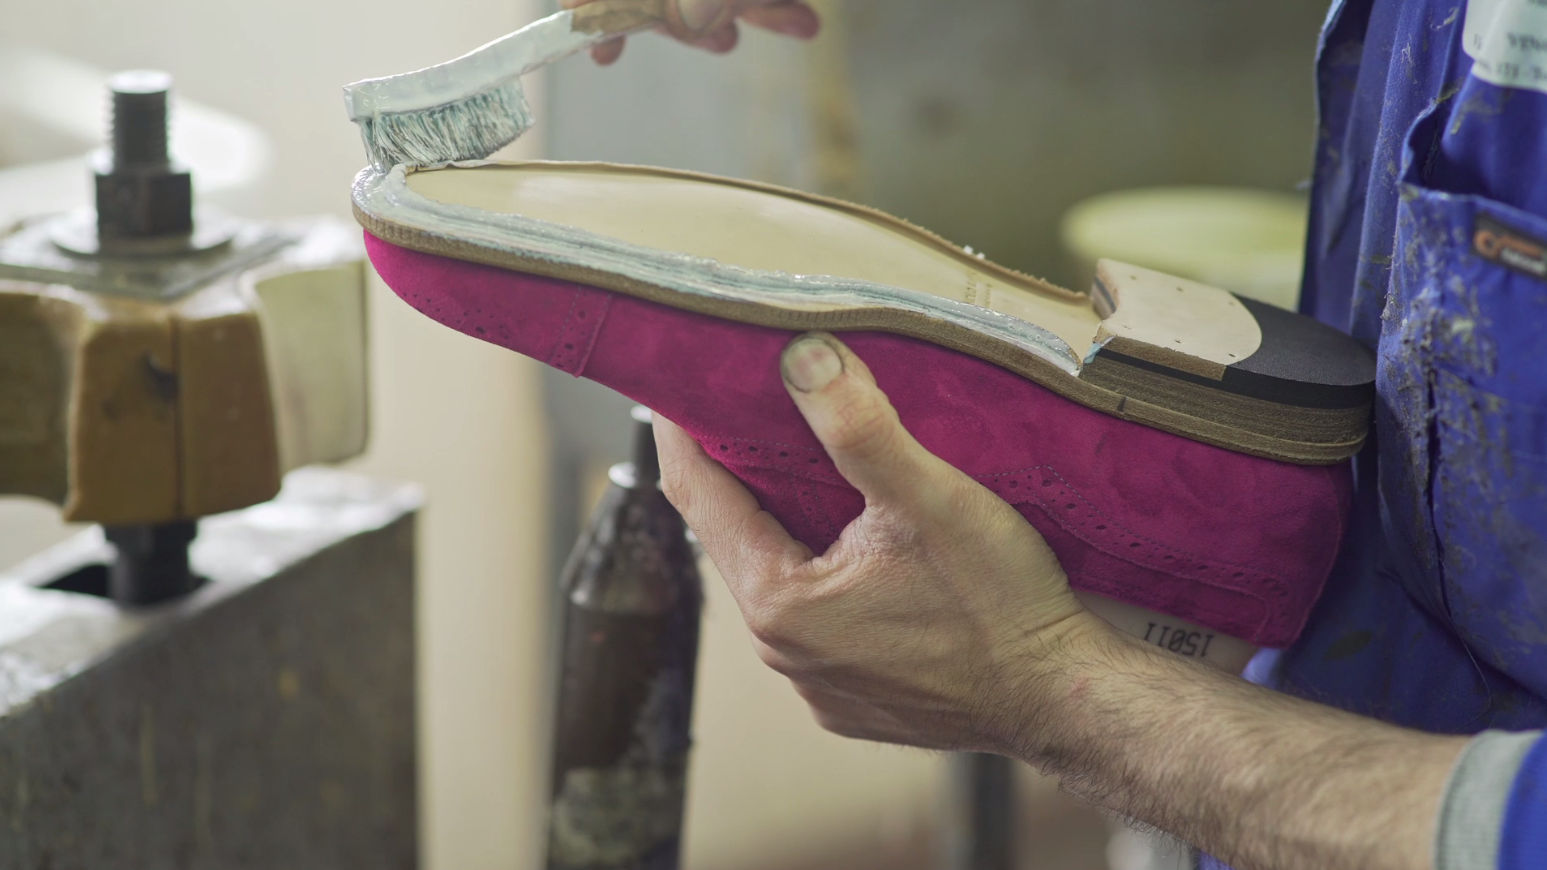 The Witney men’s shoe is upside down in the craftsman’s left hand. In his right hand he is holding a brush covered in glue.